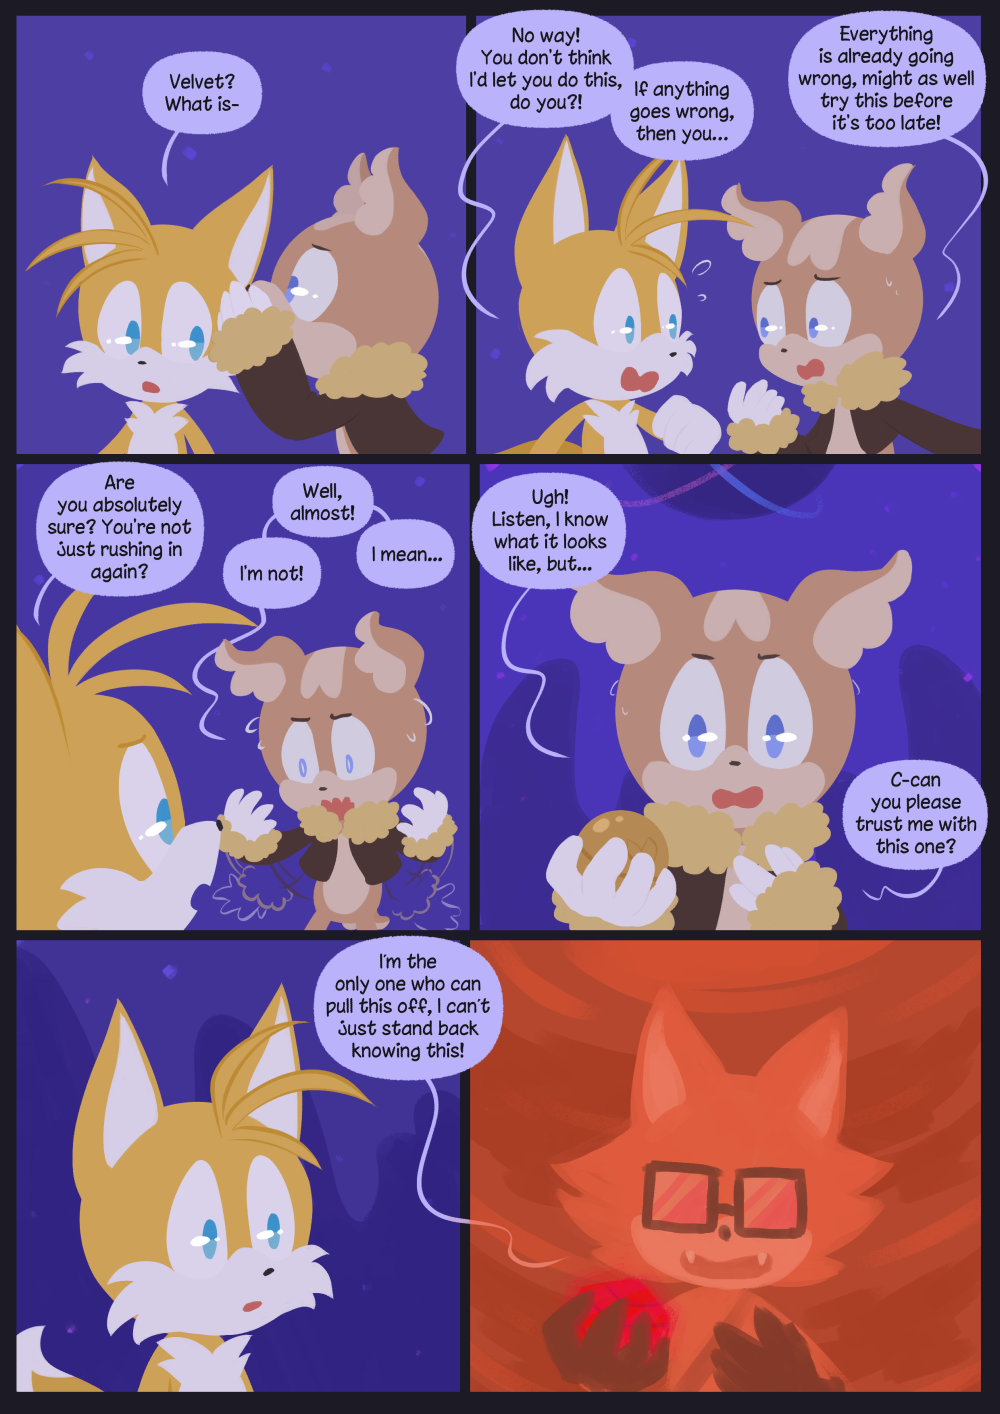 I know that in the game Tails was the one who proposed the plan. Let's pretend it's not what happened. The game did a lot of things I'd rather pretend weren't what happened